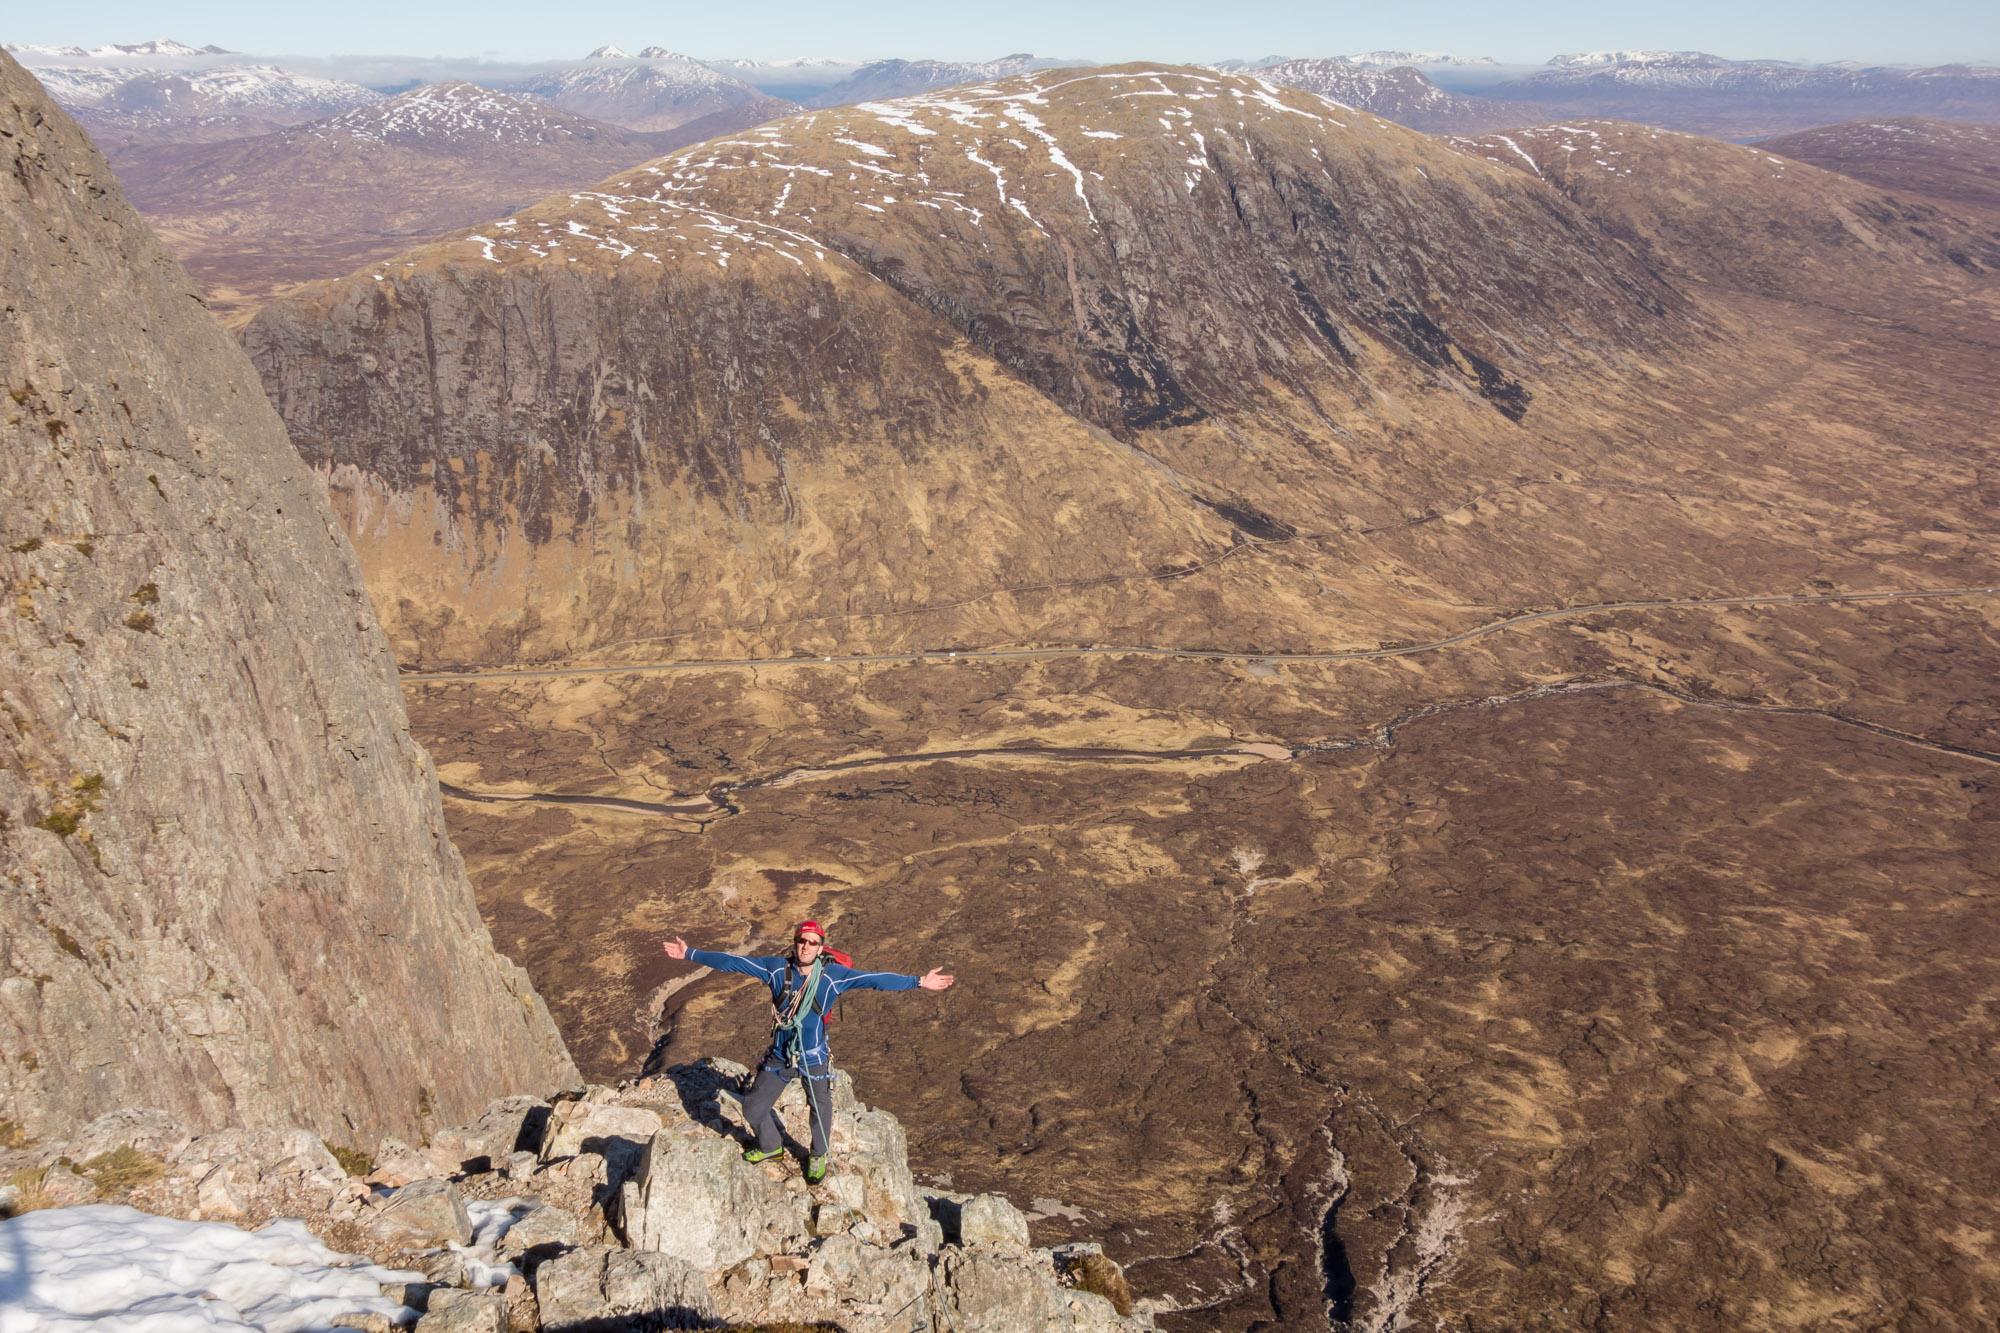 The climbing doesn't always have to be hard to be fun - stunning views and situations half way up the route